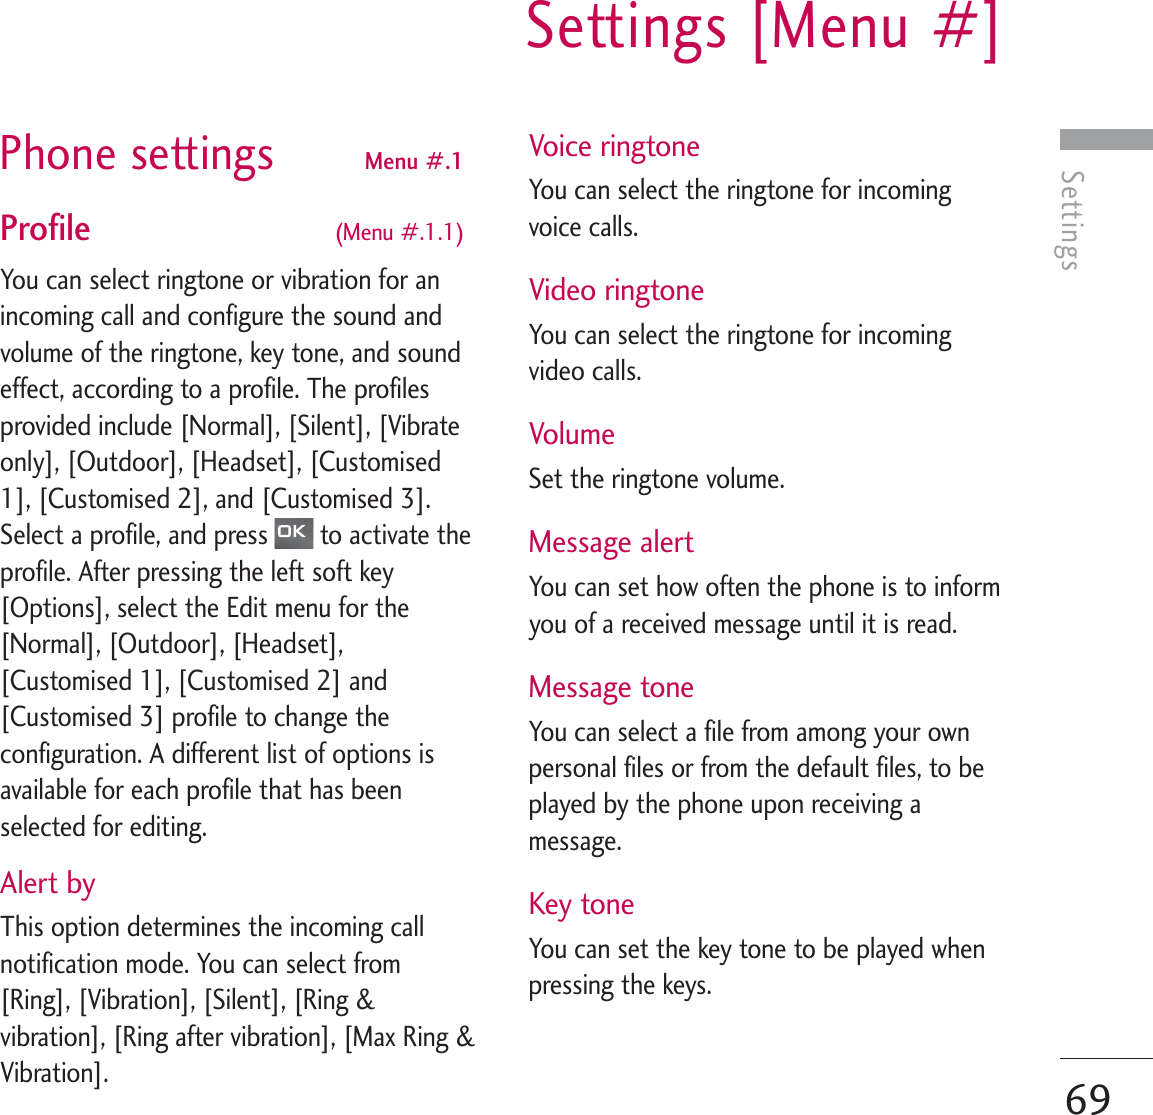 SettingsSettings [Menu #]69Phone settings Menu #.1 Profile  (Menu #.1.1)You can select ringtone or vibration for anincoming call and configure the sound andvolume of the ringtone, key tone, and soundeffect, according to a profile. The profilesprovided include [Normal], [Silent], [Vibrateonly], [Outdoor], [Headset], [Customised1], [Customised 2], and [Customised 3].Select a profile, and press  to activate theprofile. After pressing the left soft key[Options], select the Edit menu for the[Normal], [Outdoor], [Headset],[Customised 1], [Customised 2] and[Customised 3] profile to change theconfiguration. A different list of options isavailable for each profile that has beenselected for editing.Alert byThis option determines the incoming callnotification mode. You can select from[Ring], [Vibration], [Silent], [Ring &amp;vibration], [Ring after vibration], [Max Ring &amp;Vibration].Voice ringtoneYou can select the ringtone for incomingvoice calls.Video ringtoneYou can select the ringtone for incomingvideo calls.VolumeSet the ringtone volume.Message alertYou can set how often the phone is to informyou of a received message until it is read.Message toneYou can select a file from among your ownpersonal files or from the default files, to beplayed by the phone upon receiving amessage.Key toneYou can set the key tone to be played whenpressing the keys.